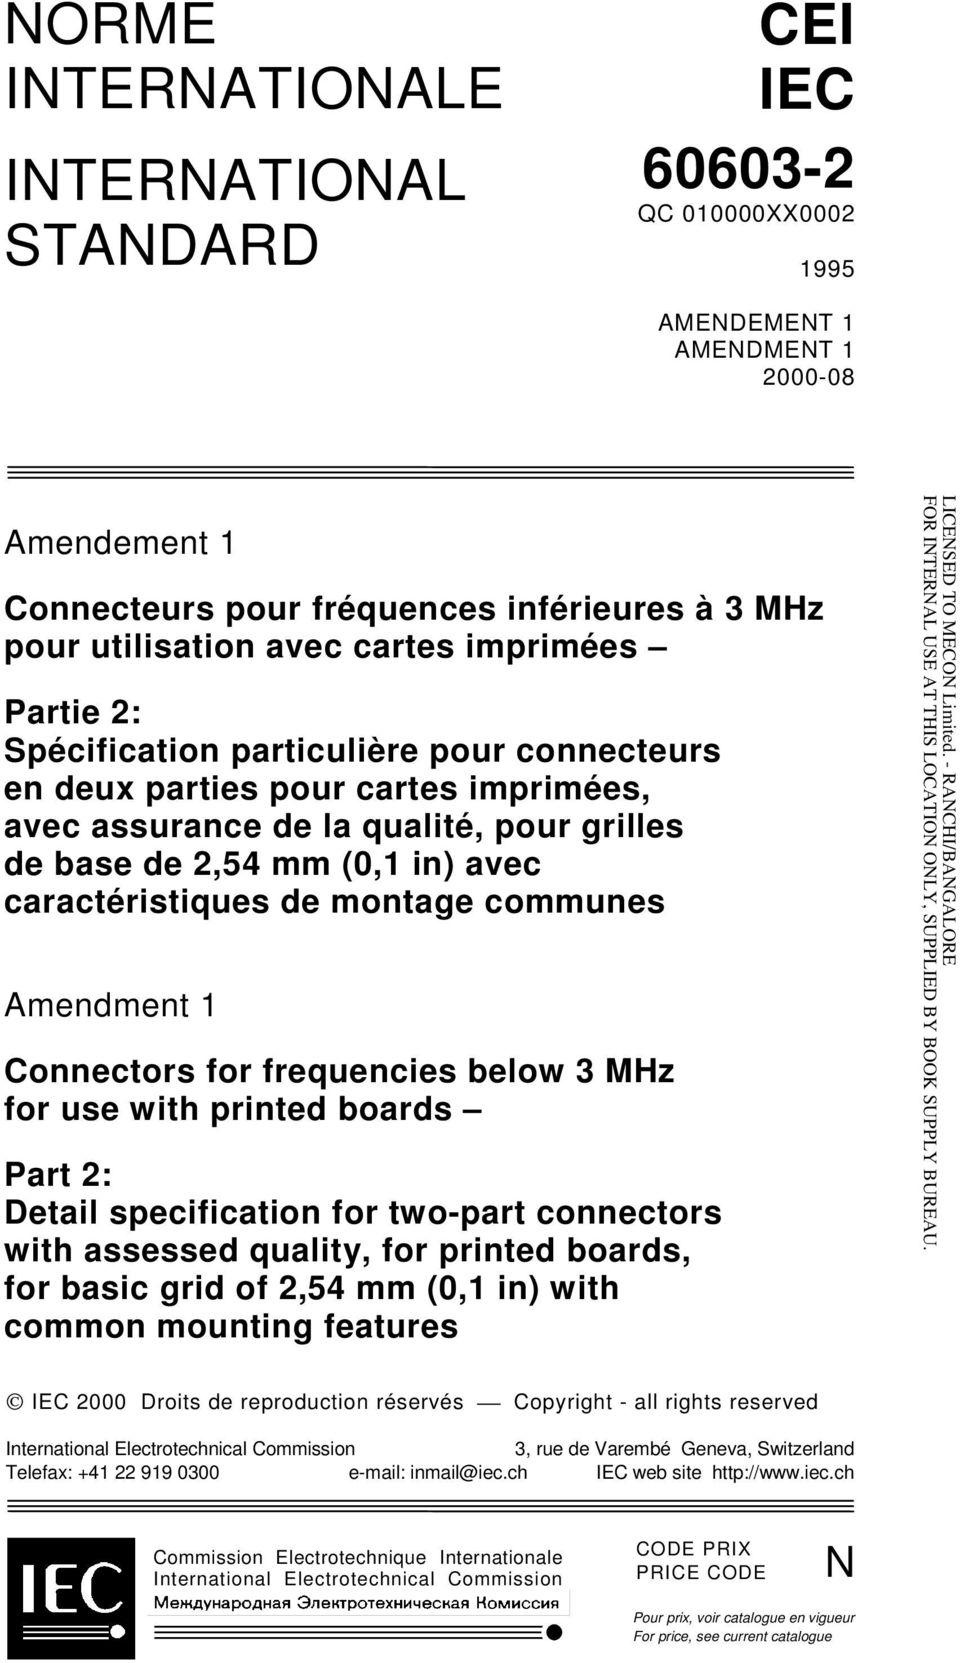 montage communes Amendment 1 Connectors for frequencies below 3 Hz for use with printed boards Part 2: Detail specification for two-part connectors with assessed quality, for printed boards, for